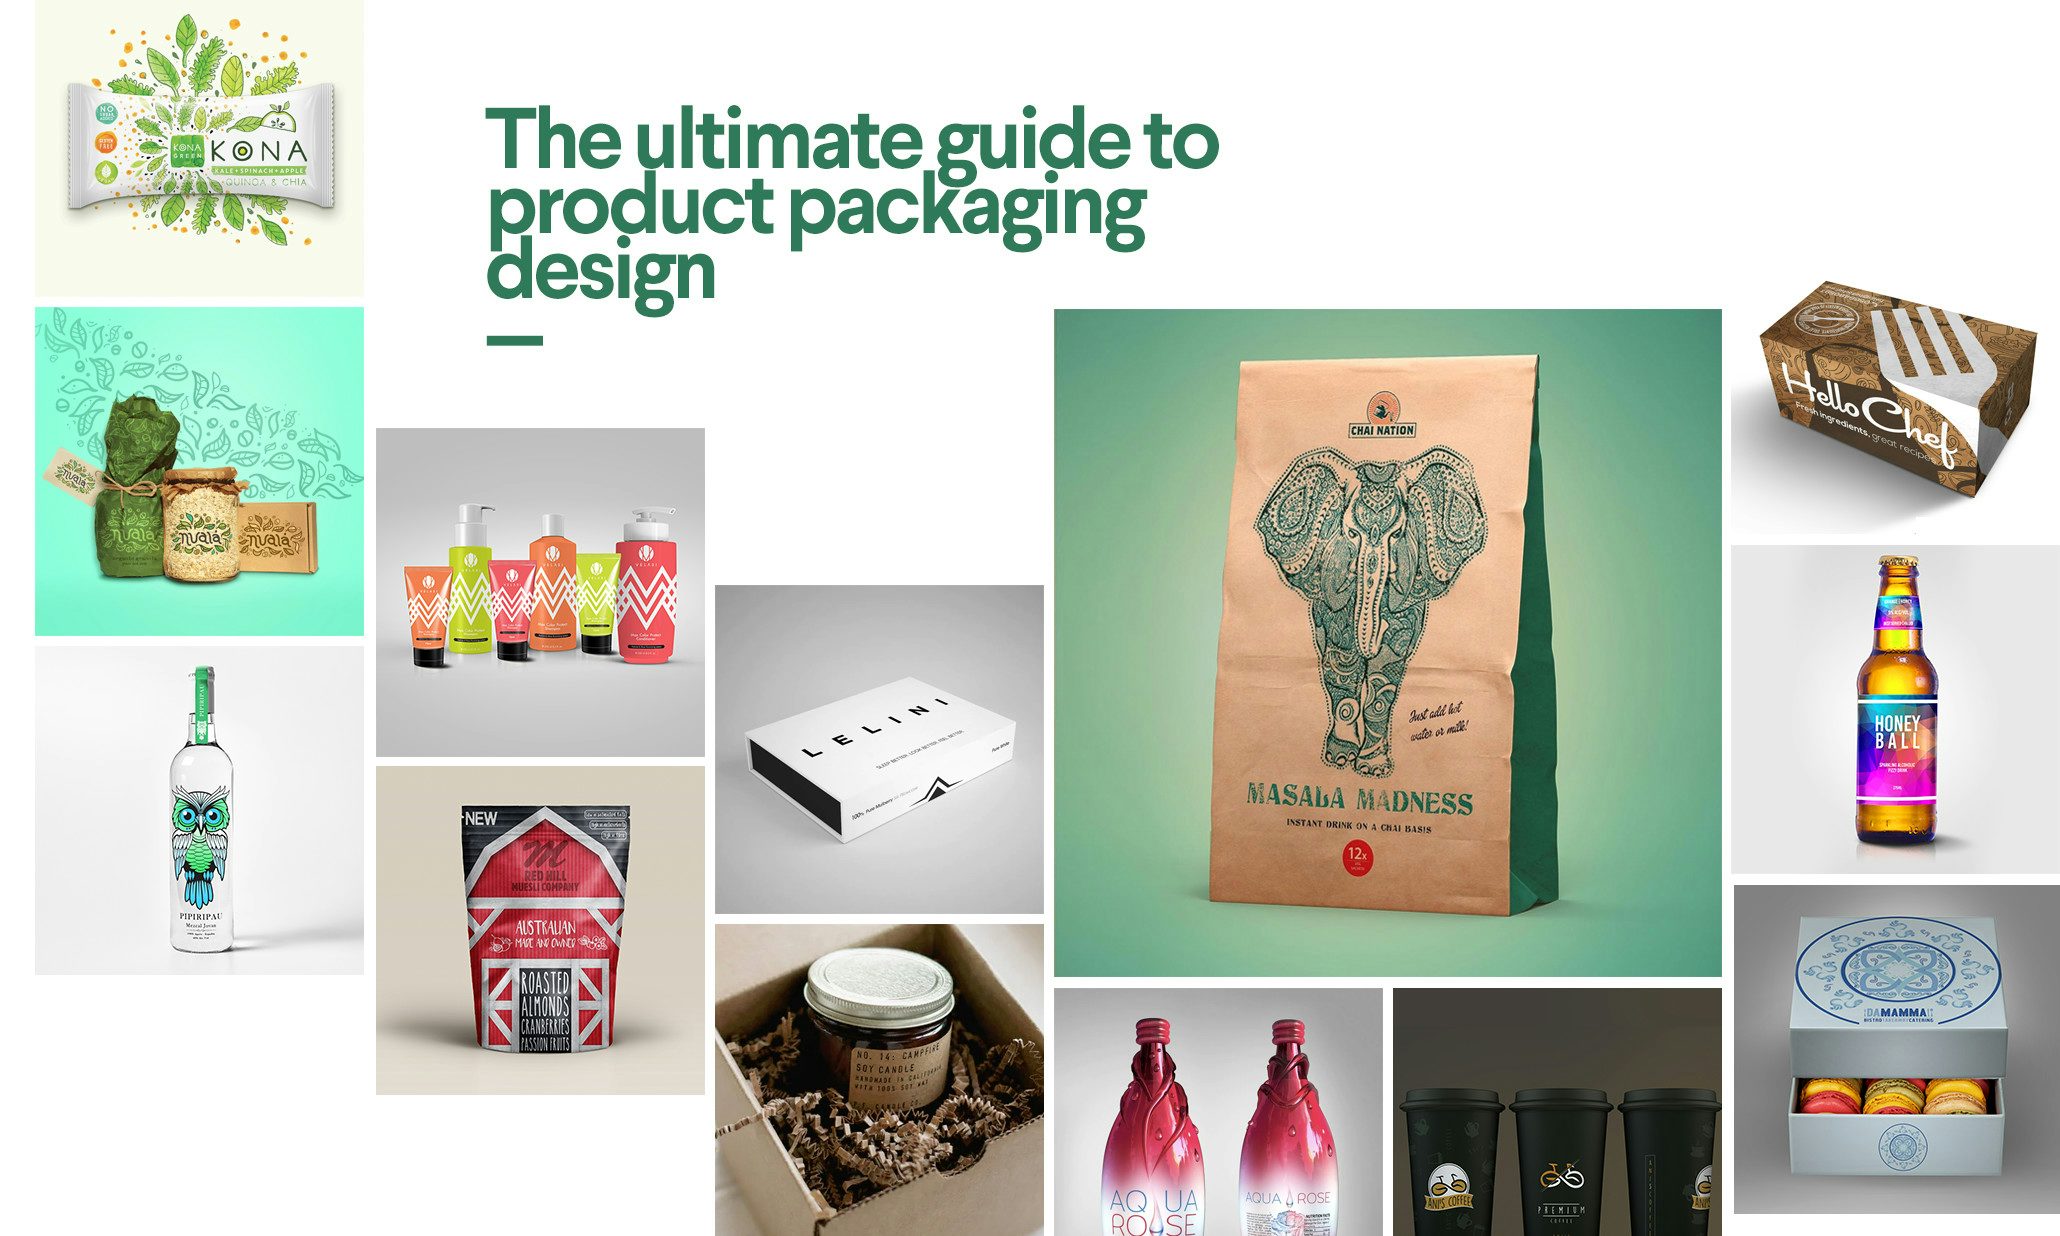 https://99designs-blog.imgix.net/blog/wp-content/uploads/2016/09/ultimate-guide-product-packaging.jpg?auto=format&q=60&w=2060&h=2060&fit=crop&crop=faces